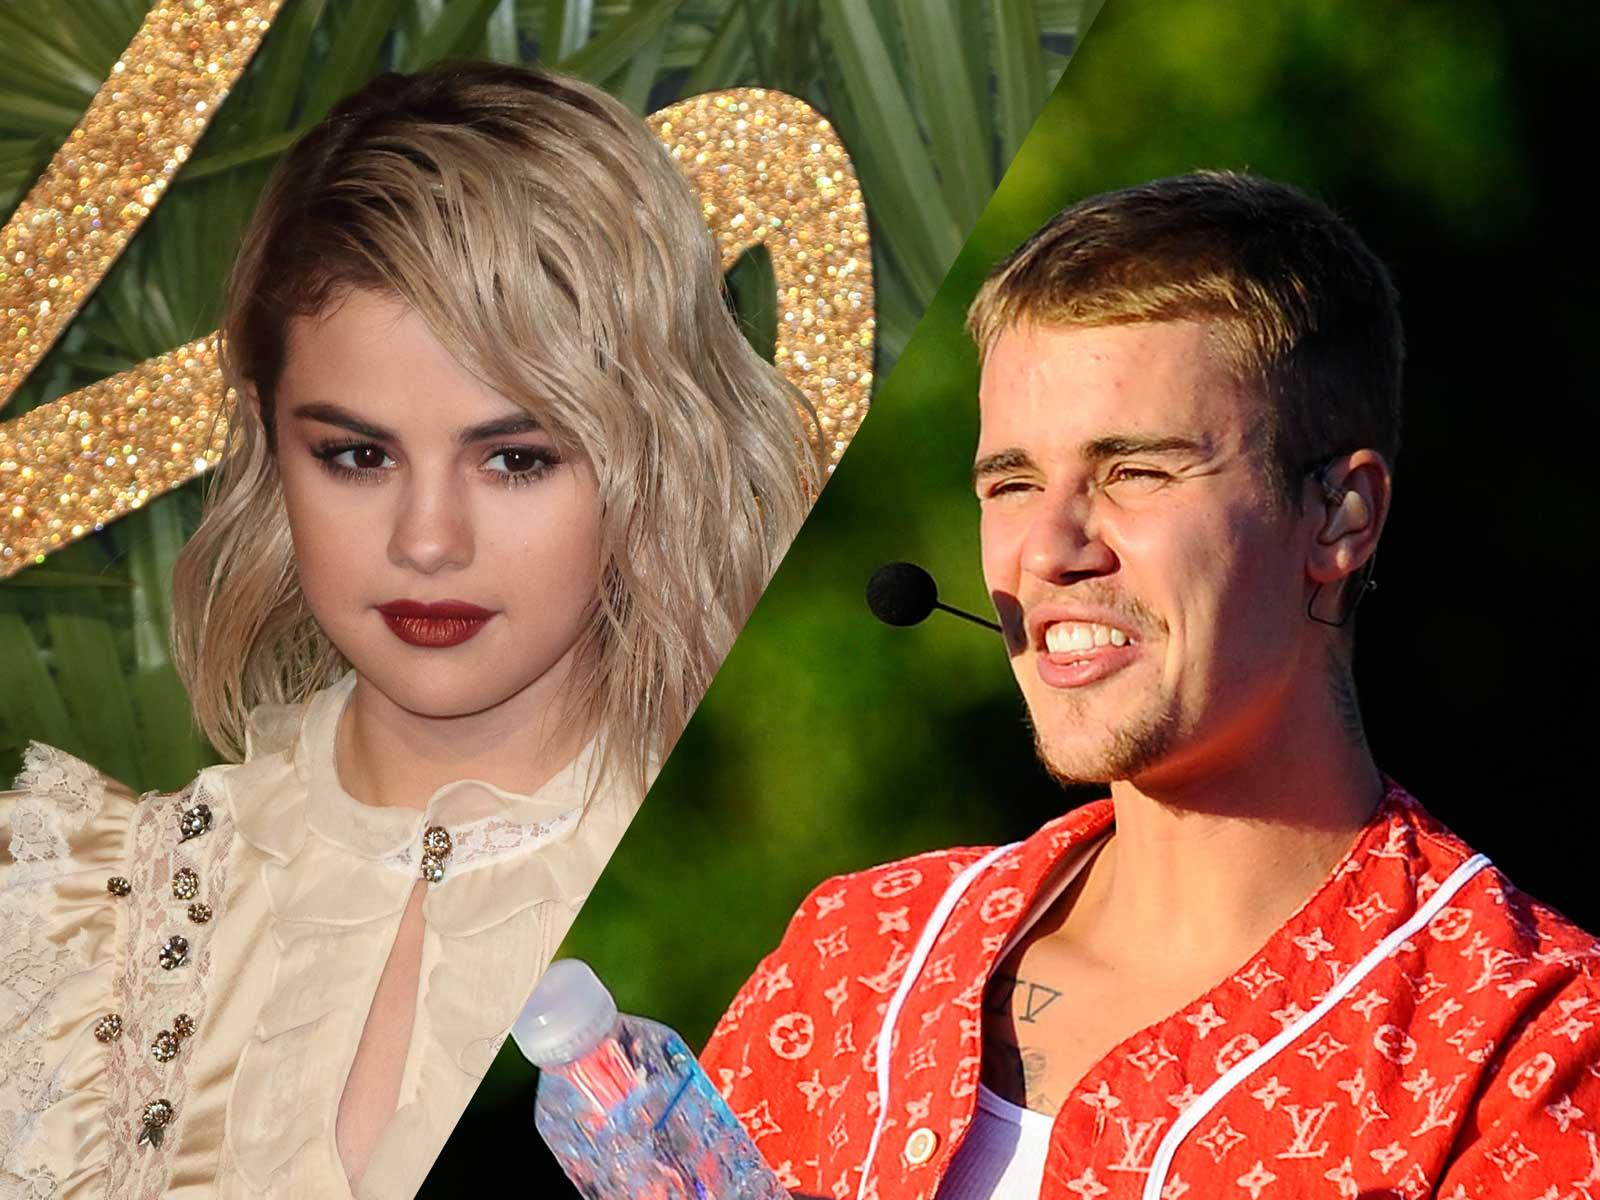 Justin Bieber and Selena Gomez Fly Back From Cabo Together on Private Jet